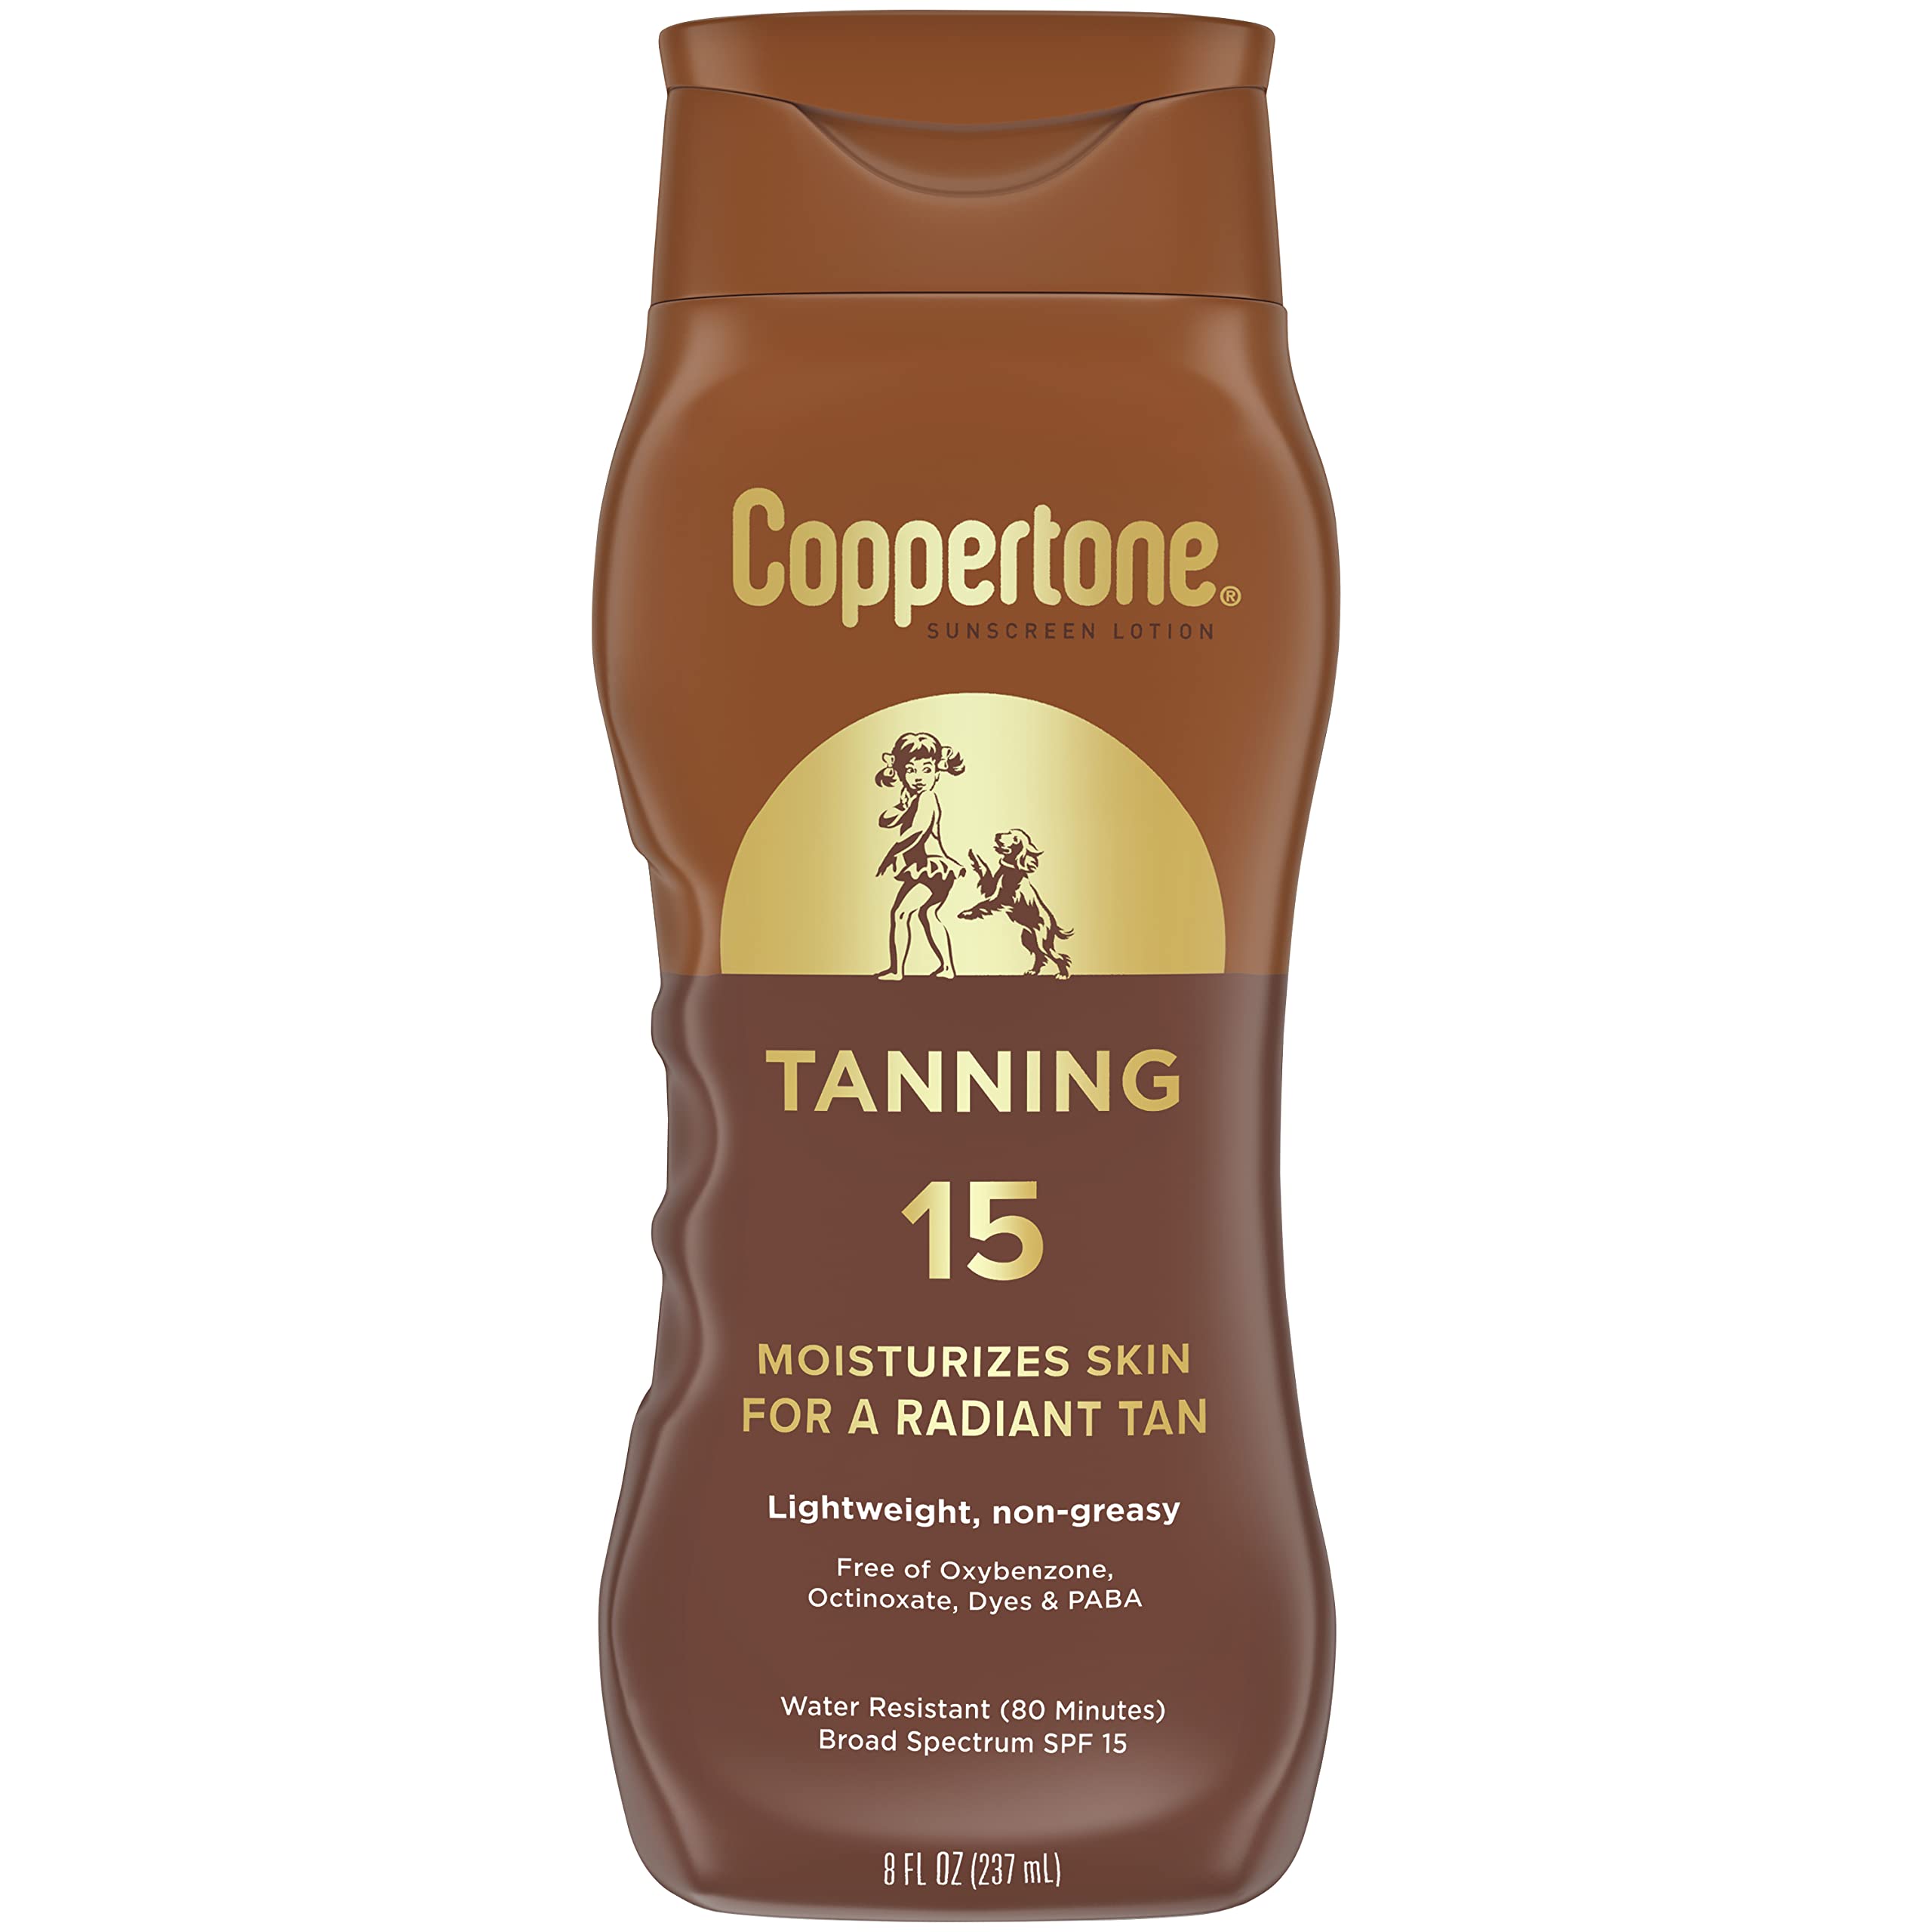 Coppertone Tanning Lotion Sunscreen LSF 15, 8oz by Coppertone